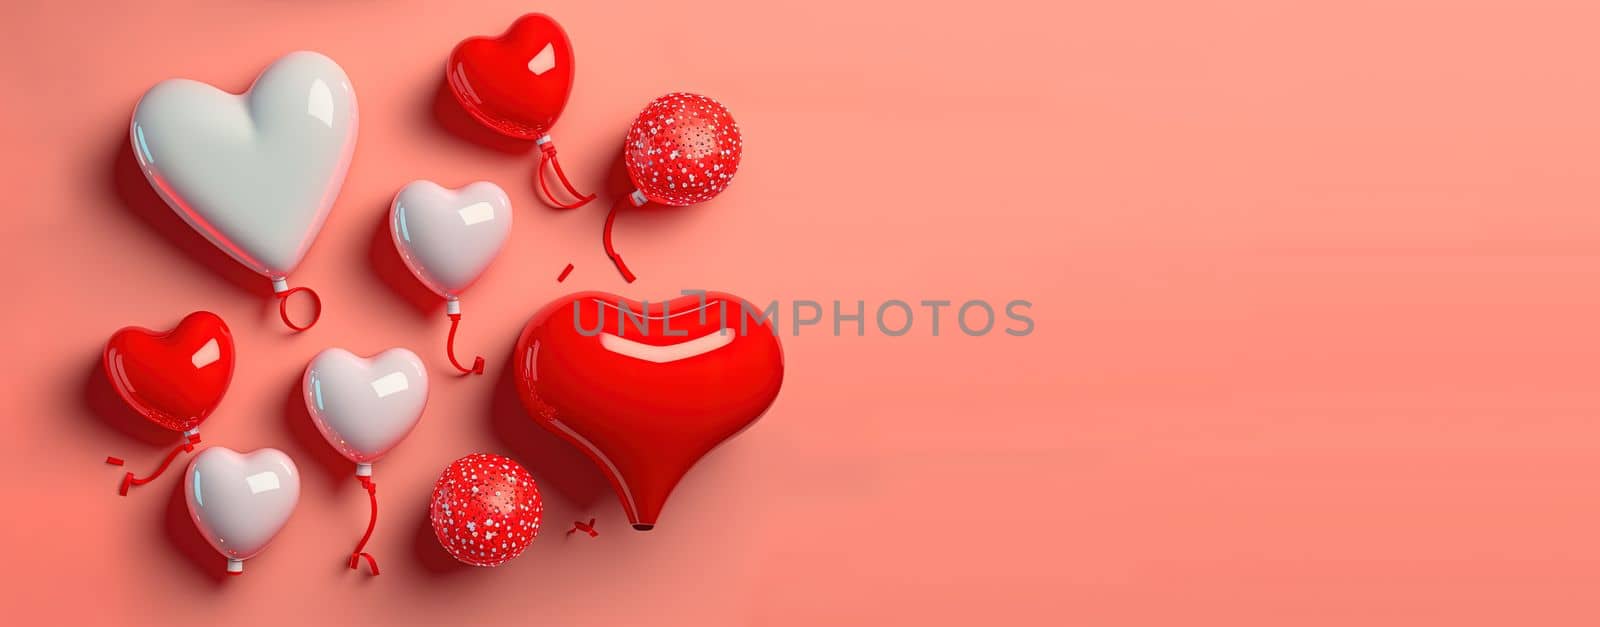 "Valentine's Day background with a radiant red 3D heart by templator